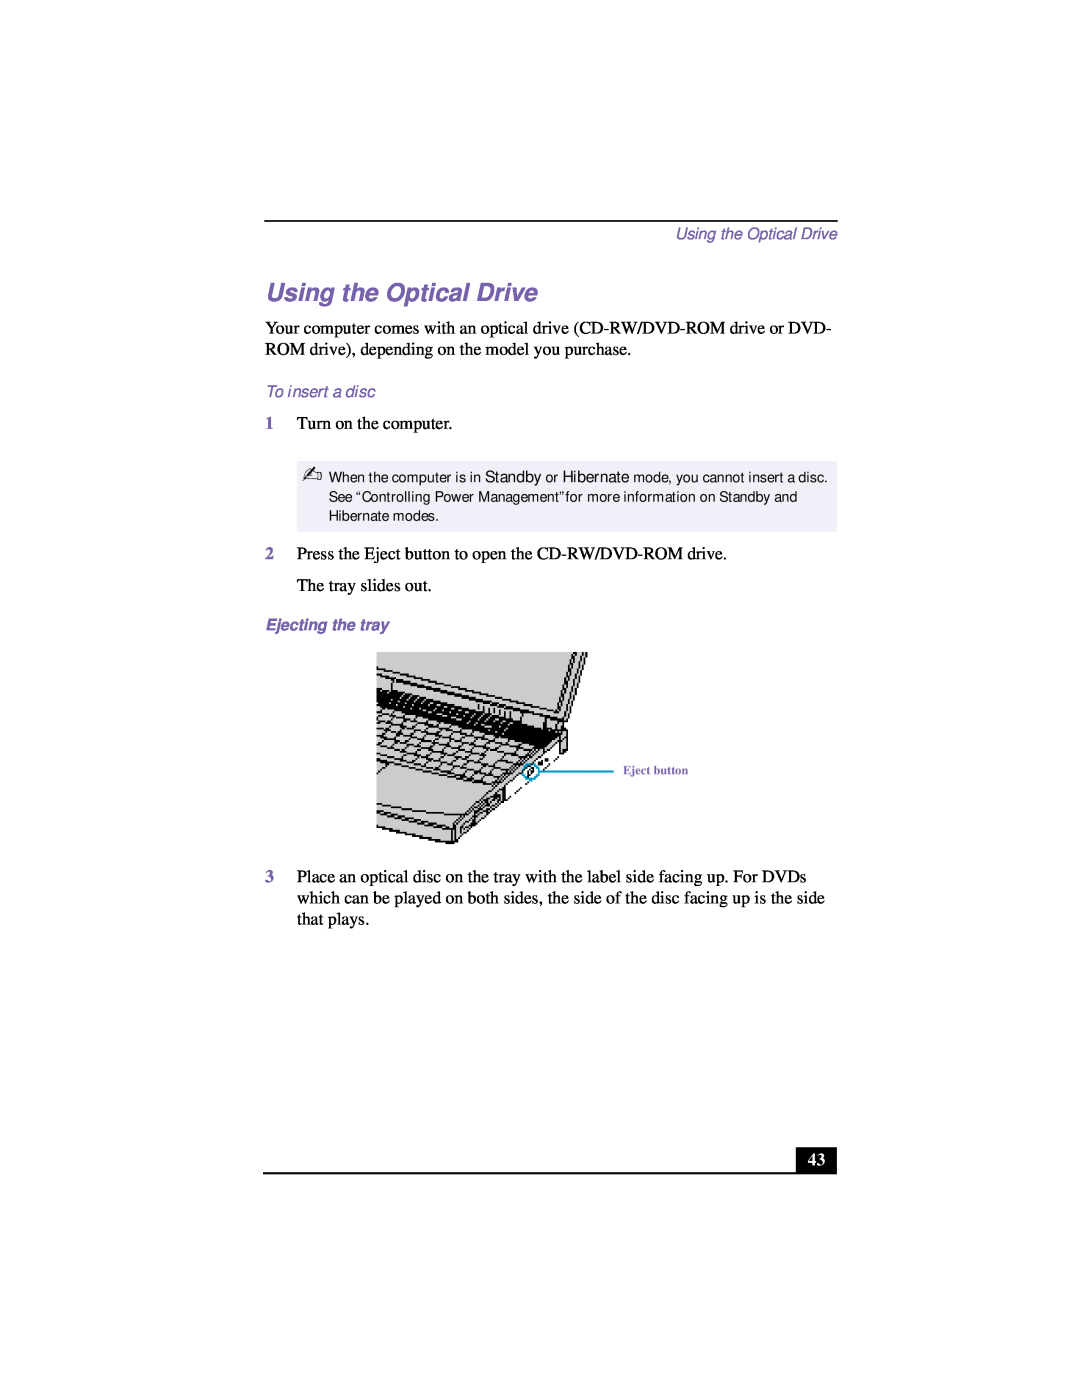 Sony PCG-FX190K, PCG-FX150K, PCG-FX140K, PCG-FX120K, PCG-FX170K manual Using the Optical Drive, To insert a disc 